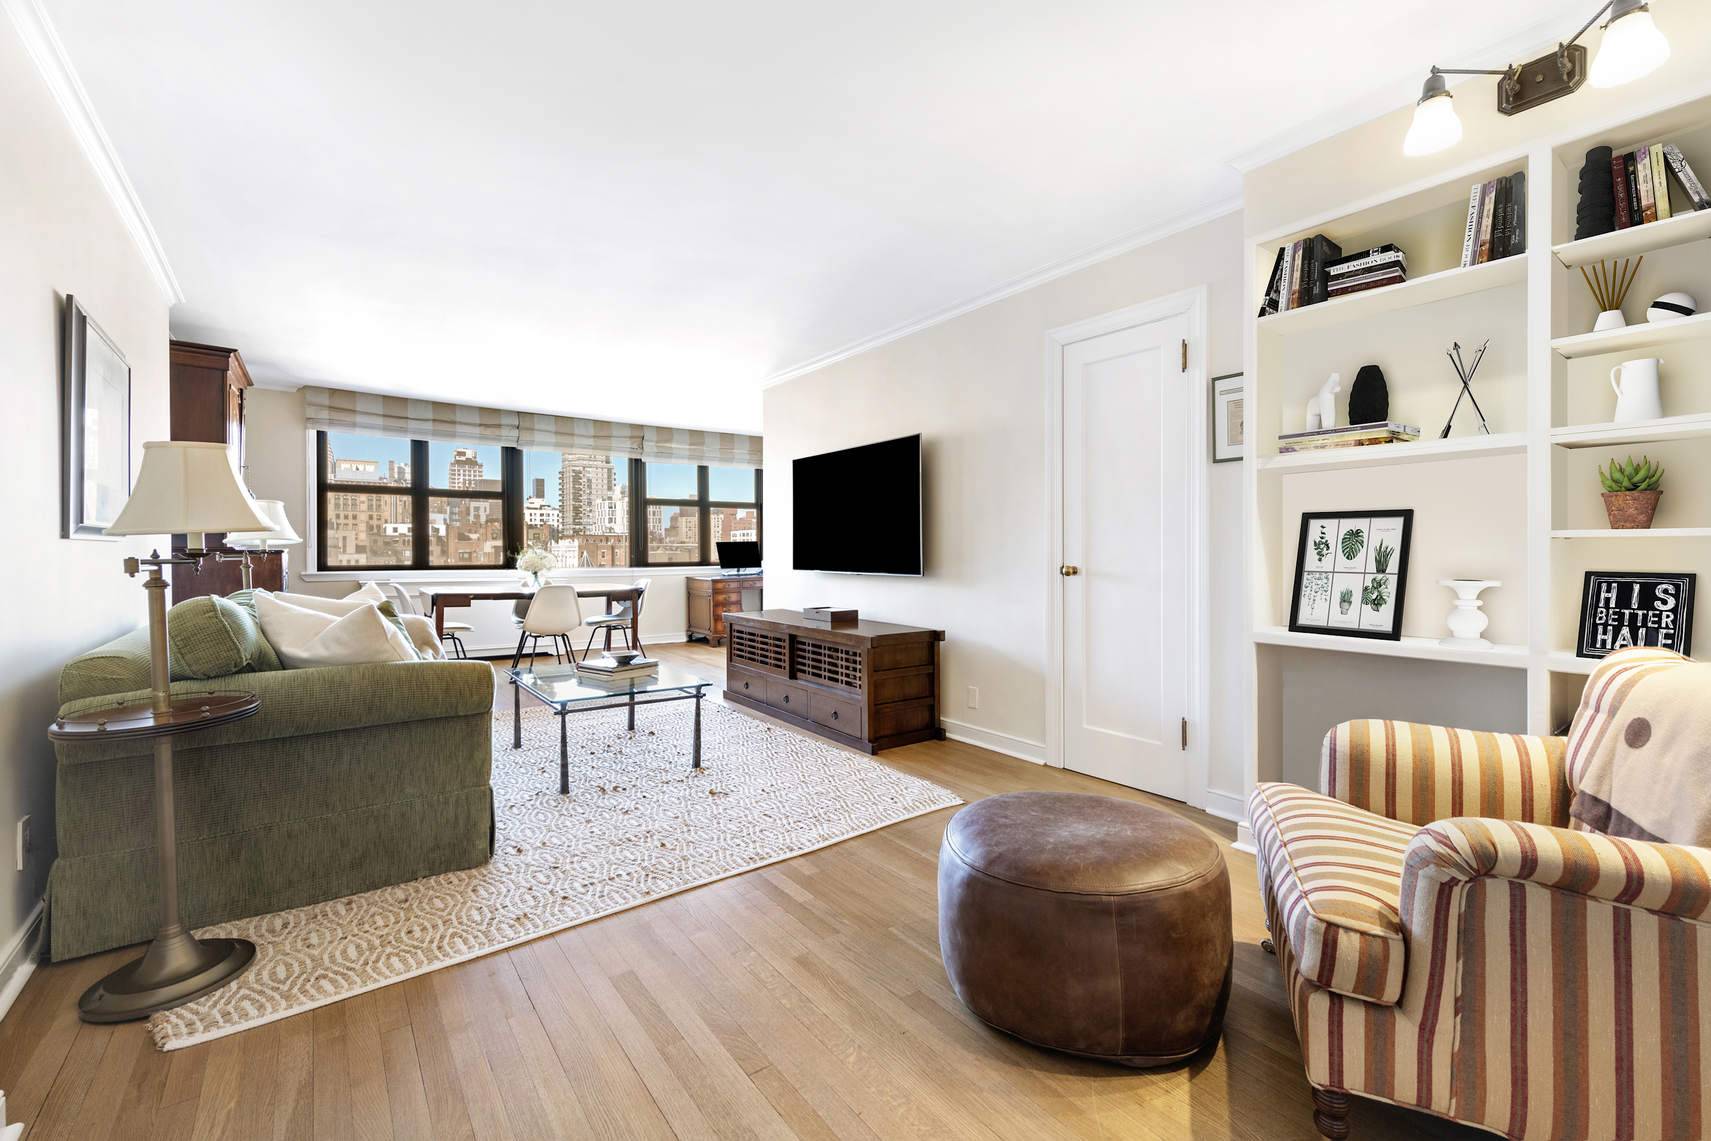 Situated in the heart of prized Gramercy Park on a gorgeous tree lined block, this high floor, oversized one bedroom offers sweeping views of the city from every room.